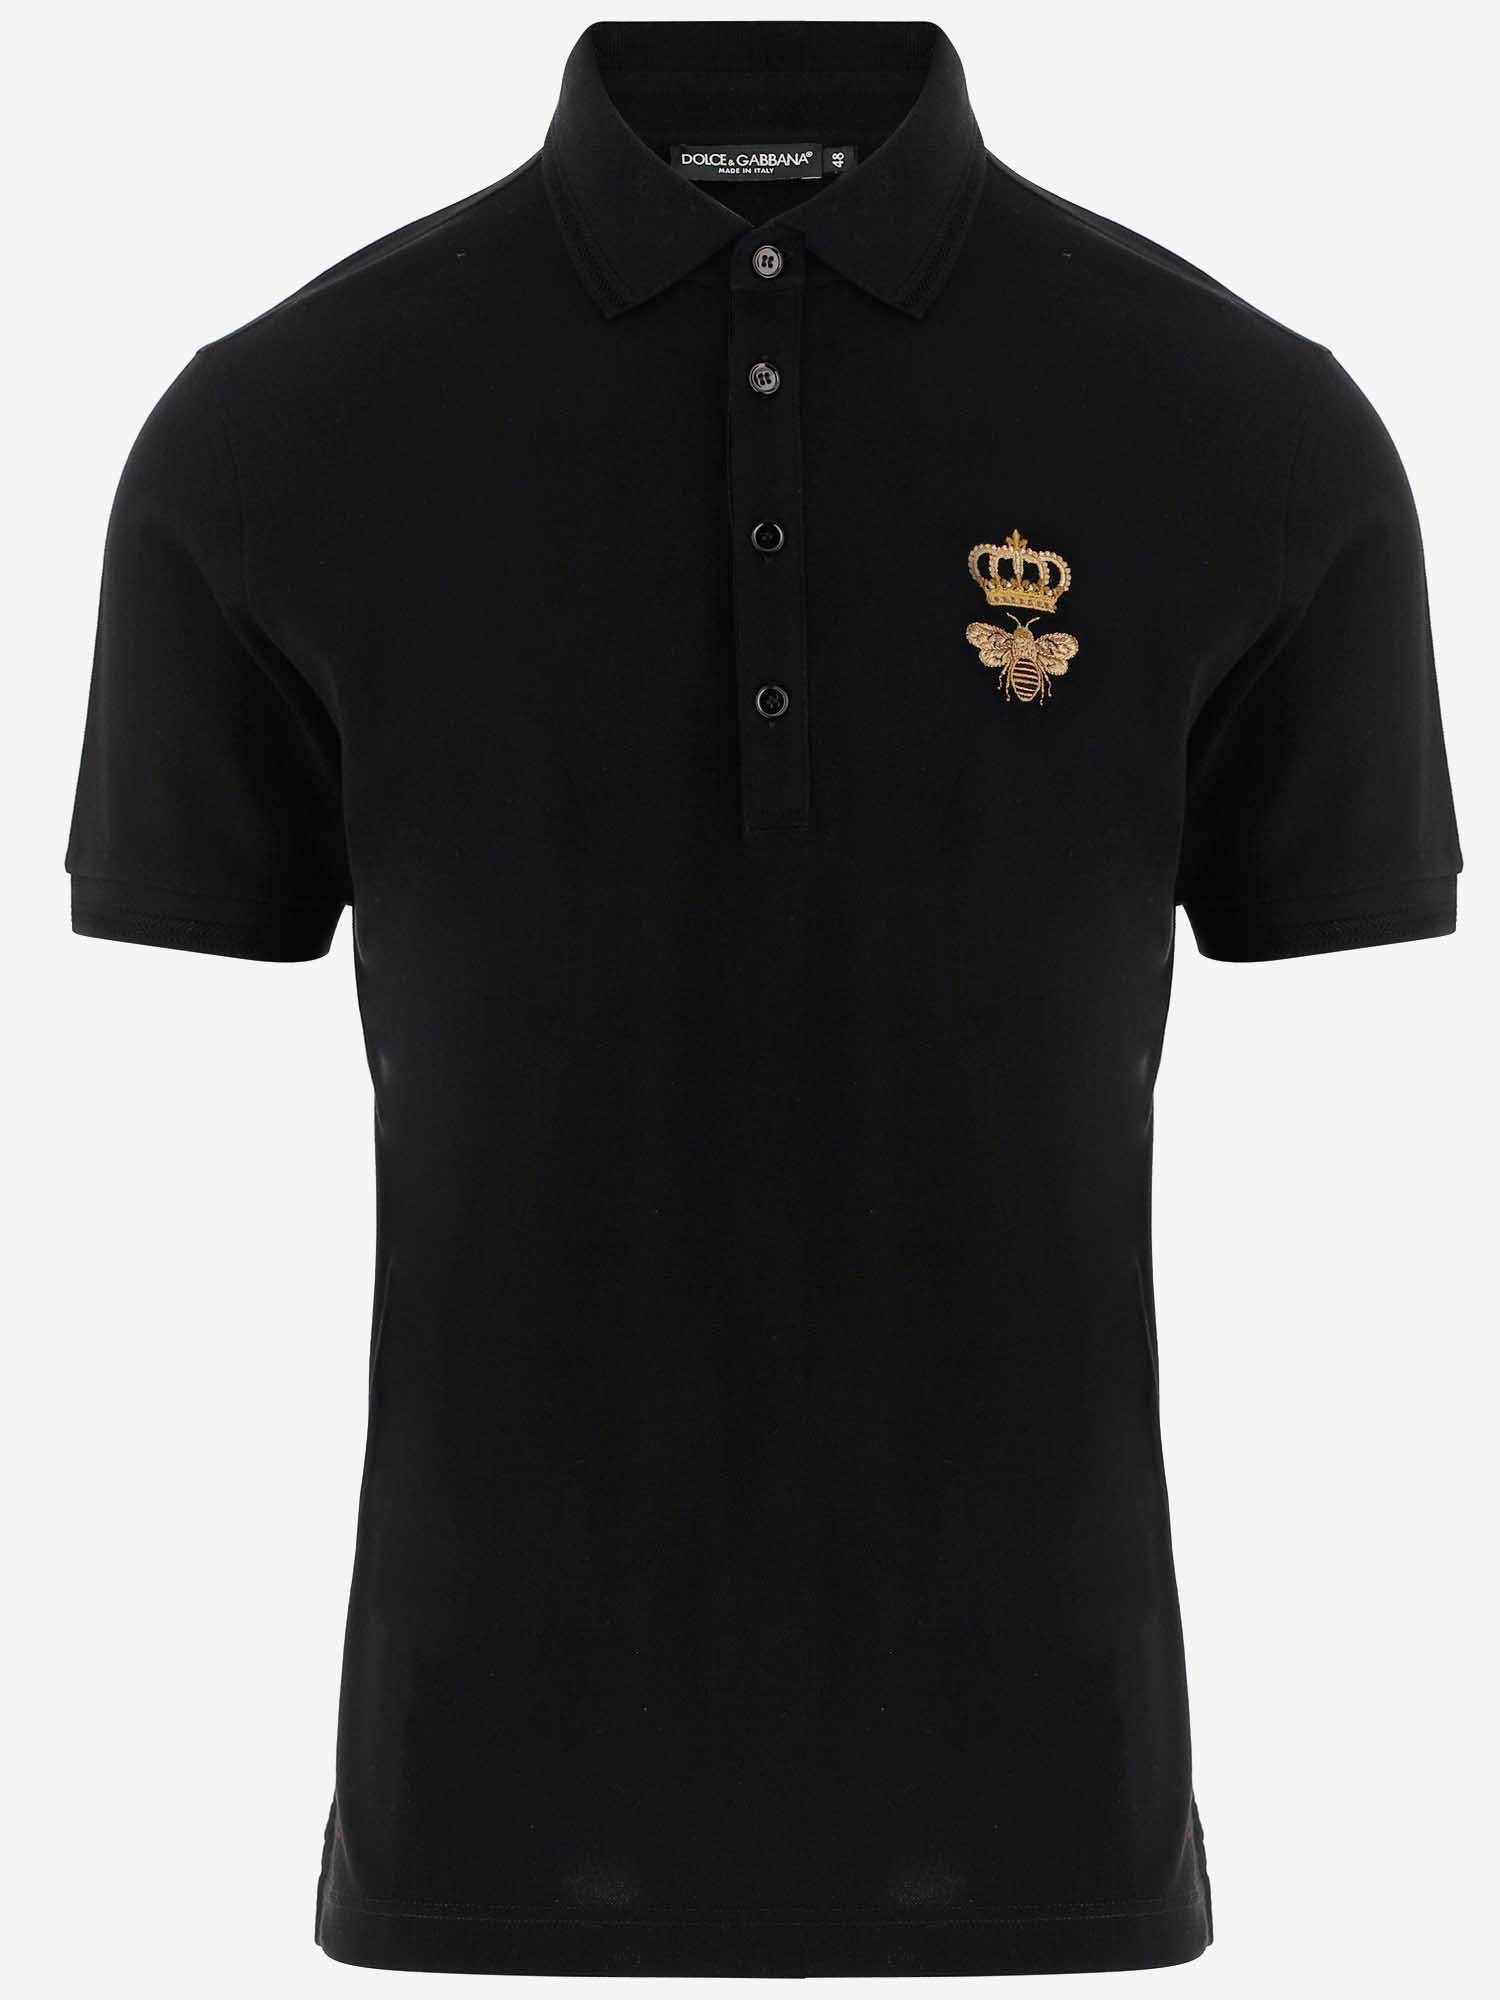 Dolce & Gabbana Cotton Logo Embroidered Polo Shirt in Black for Men - Lyst